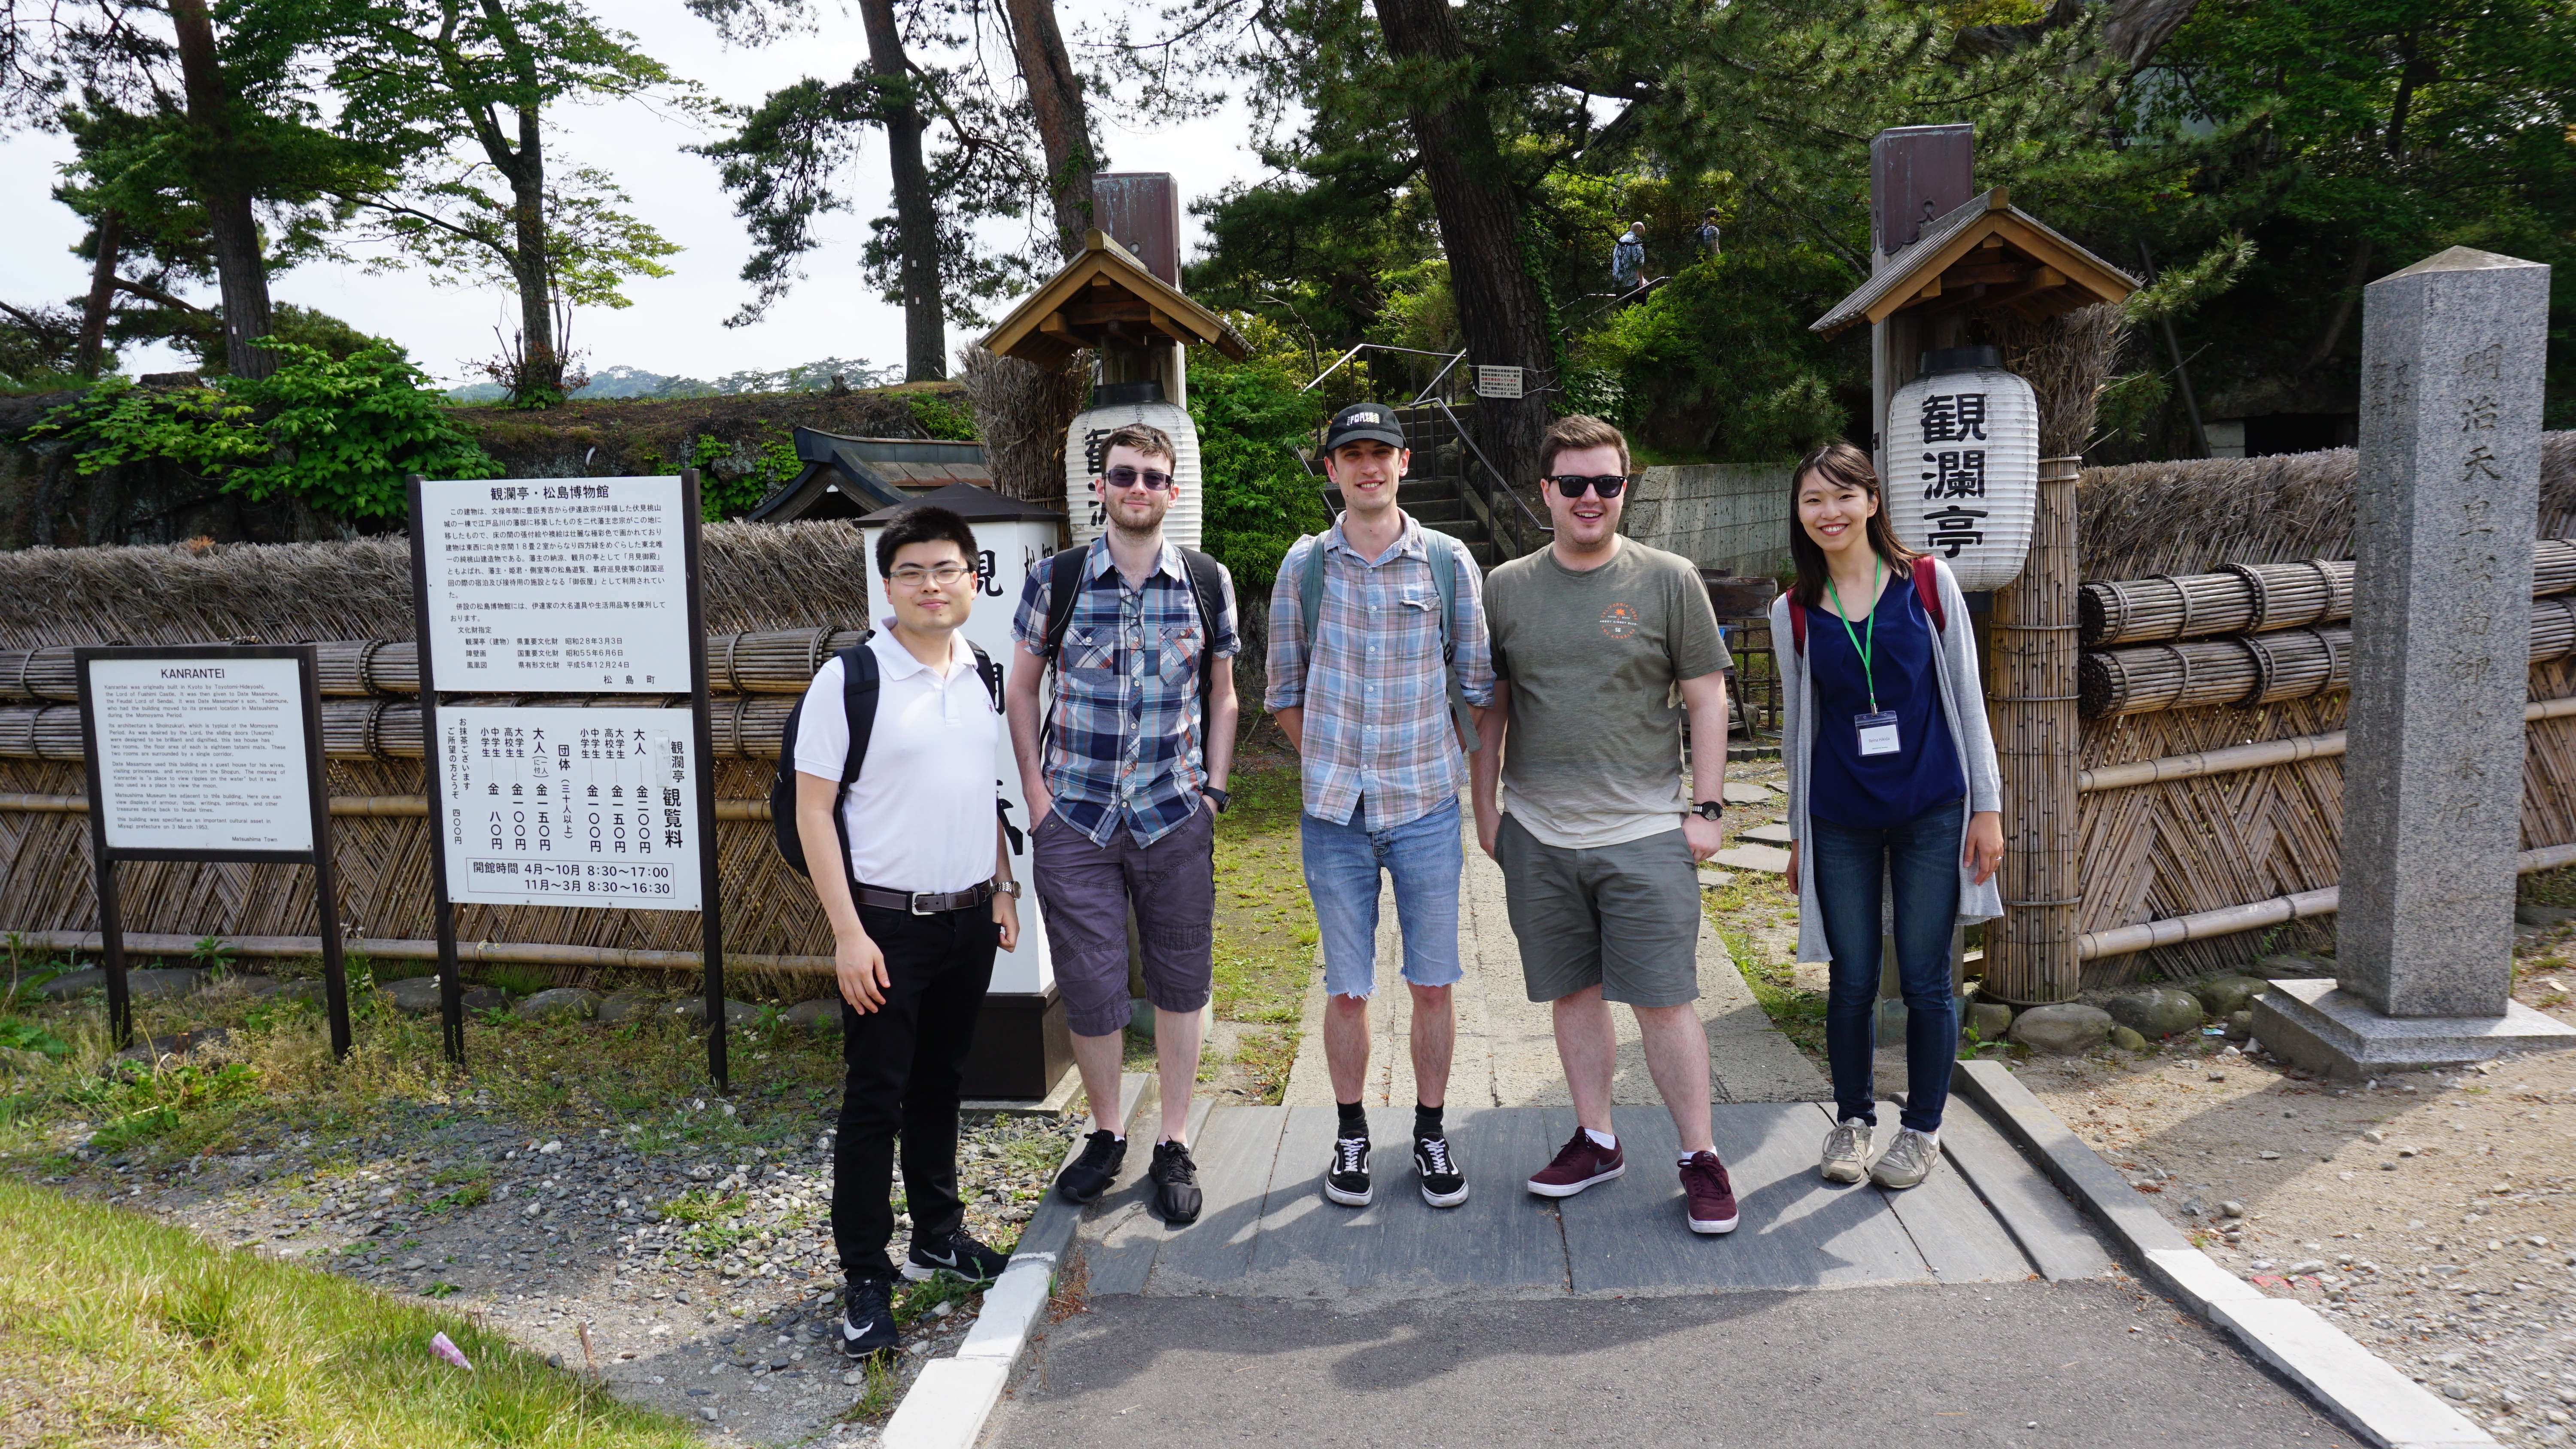 Exploring Japan with friends